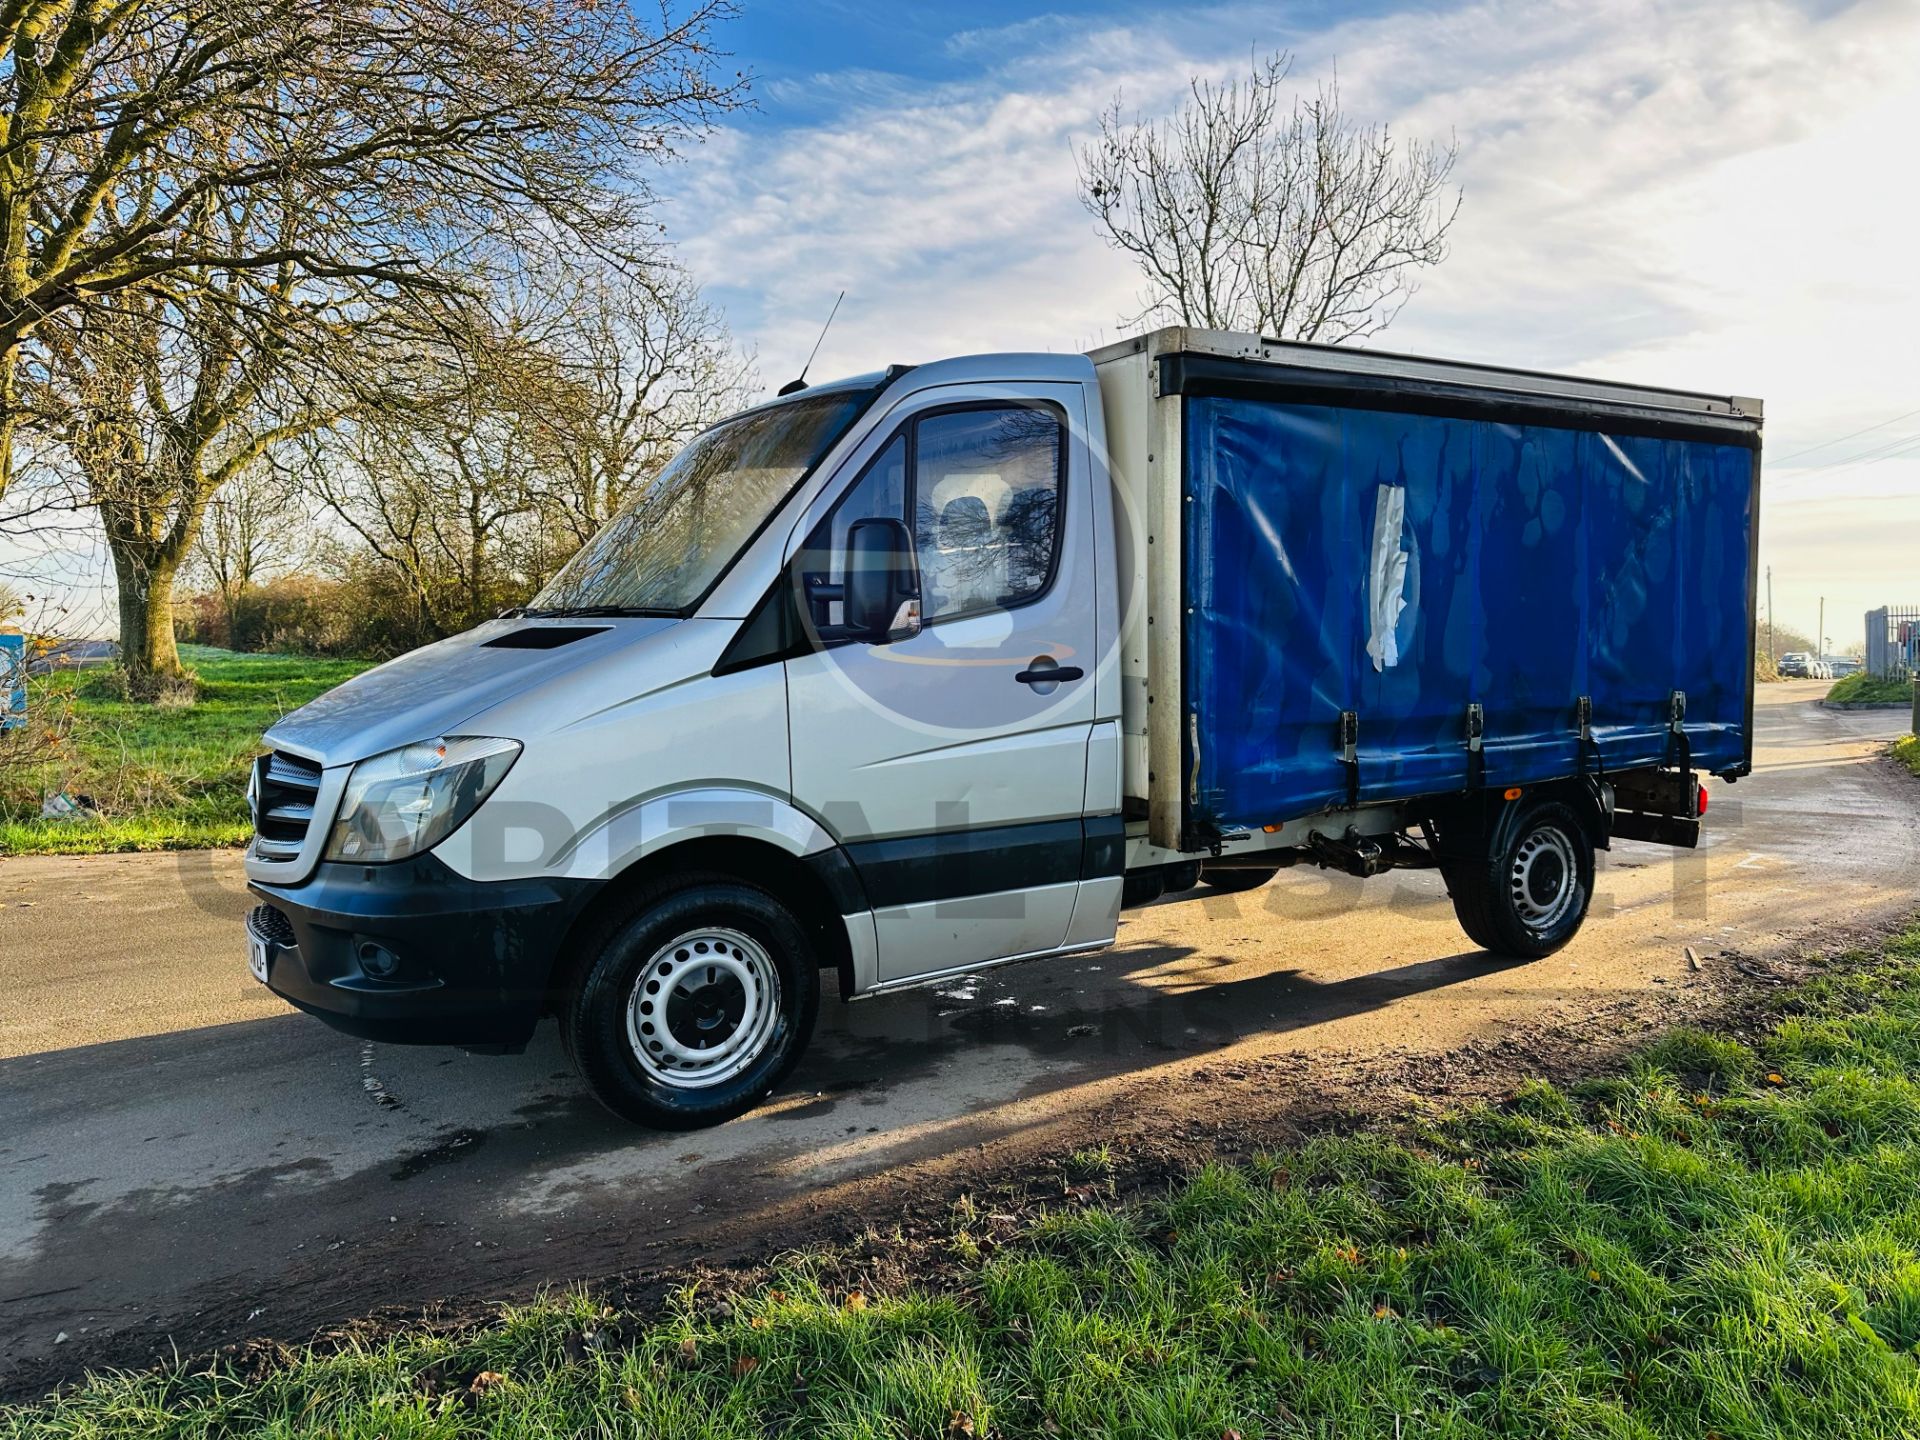 MERCEDES-BENZ SPRINTER 313 CDI - *LWB CURTAINSIDER TRUCK* - 2016 MODEL - 3 SEATER CABIN - AIR CON!!! - Image 5 of 26